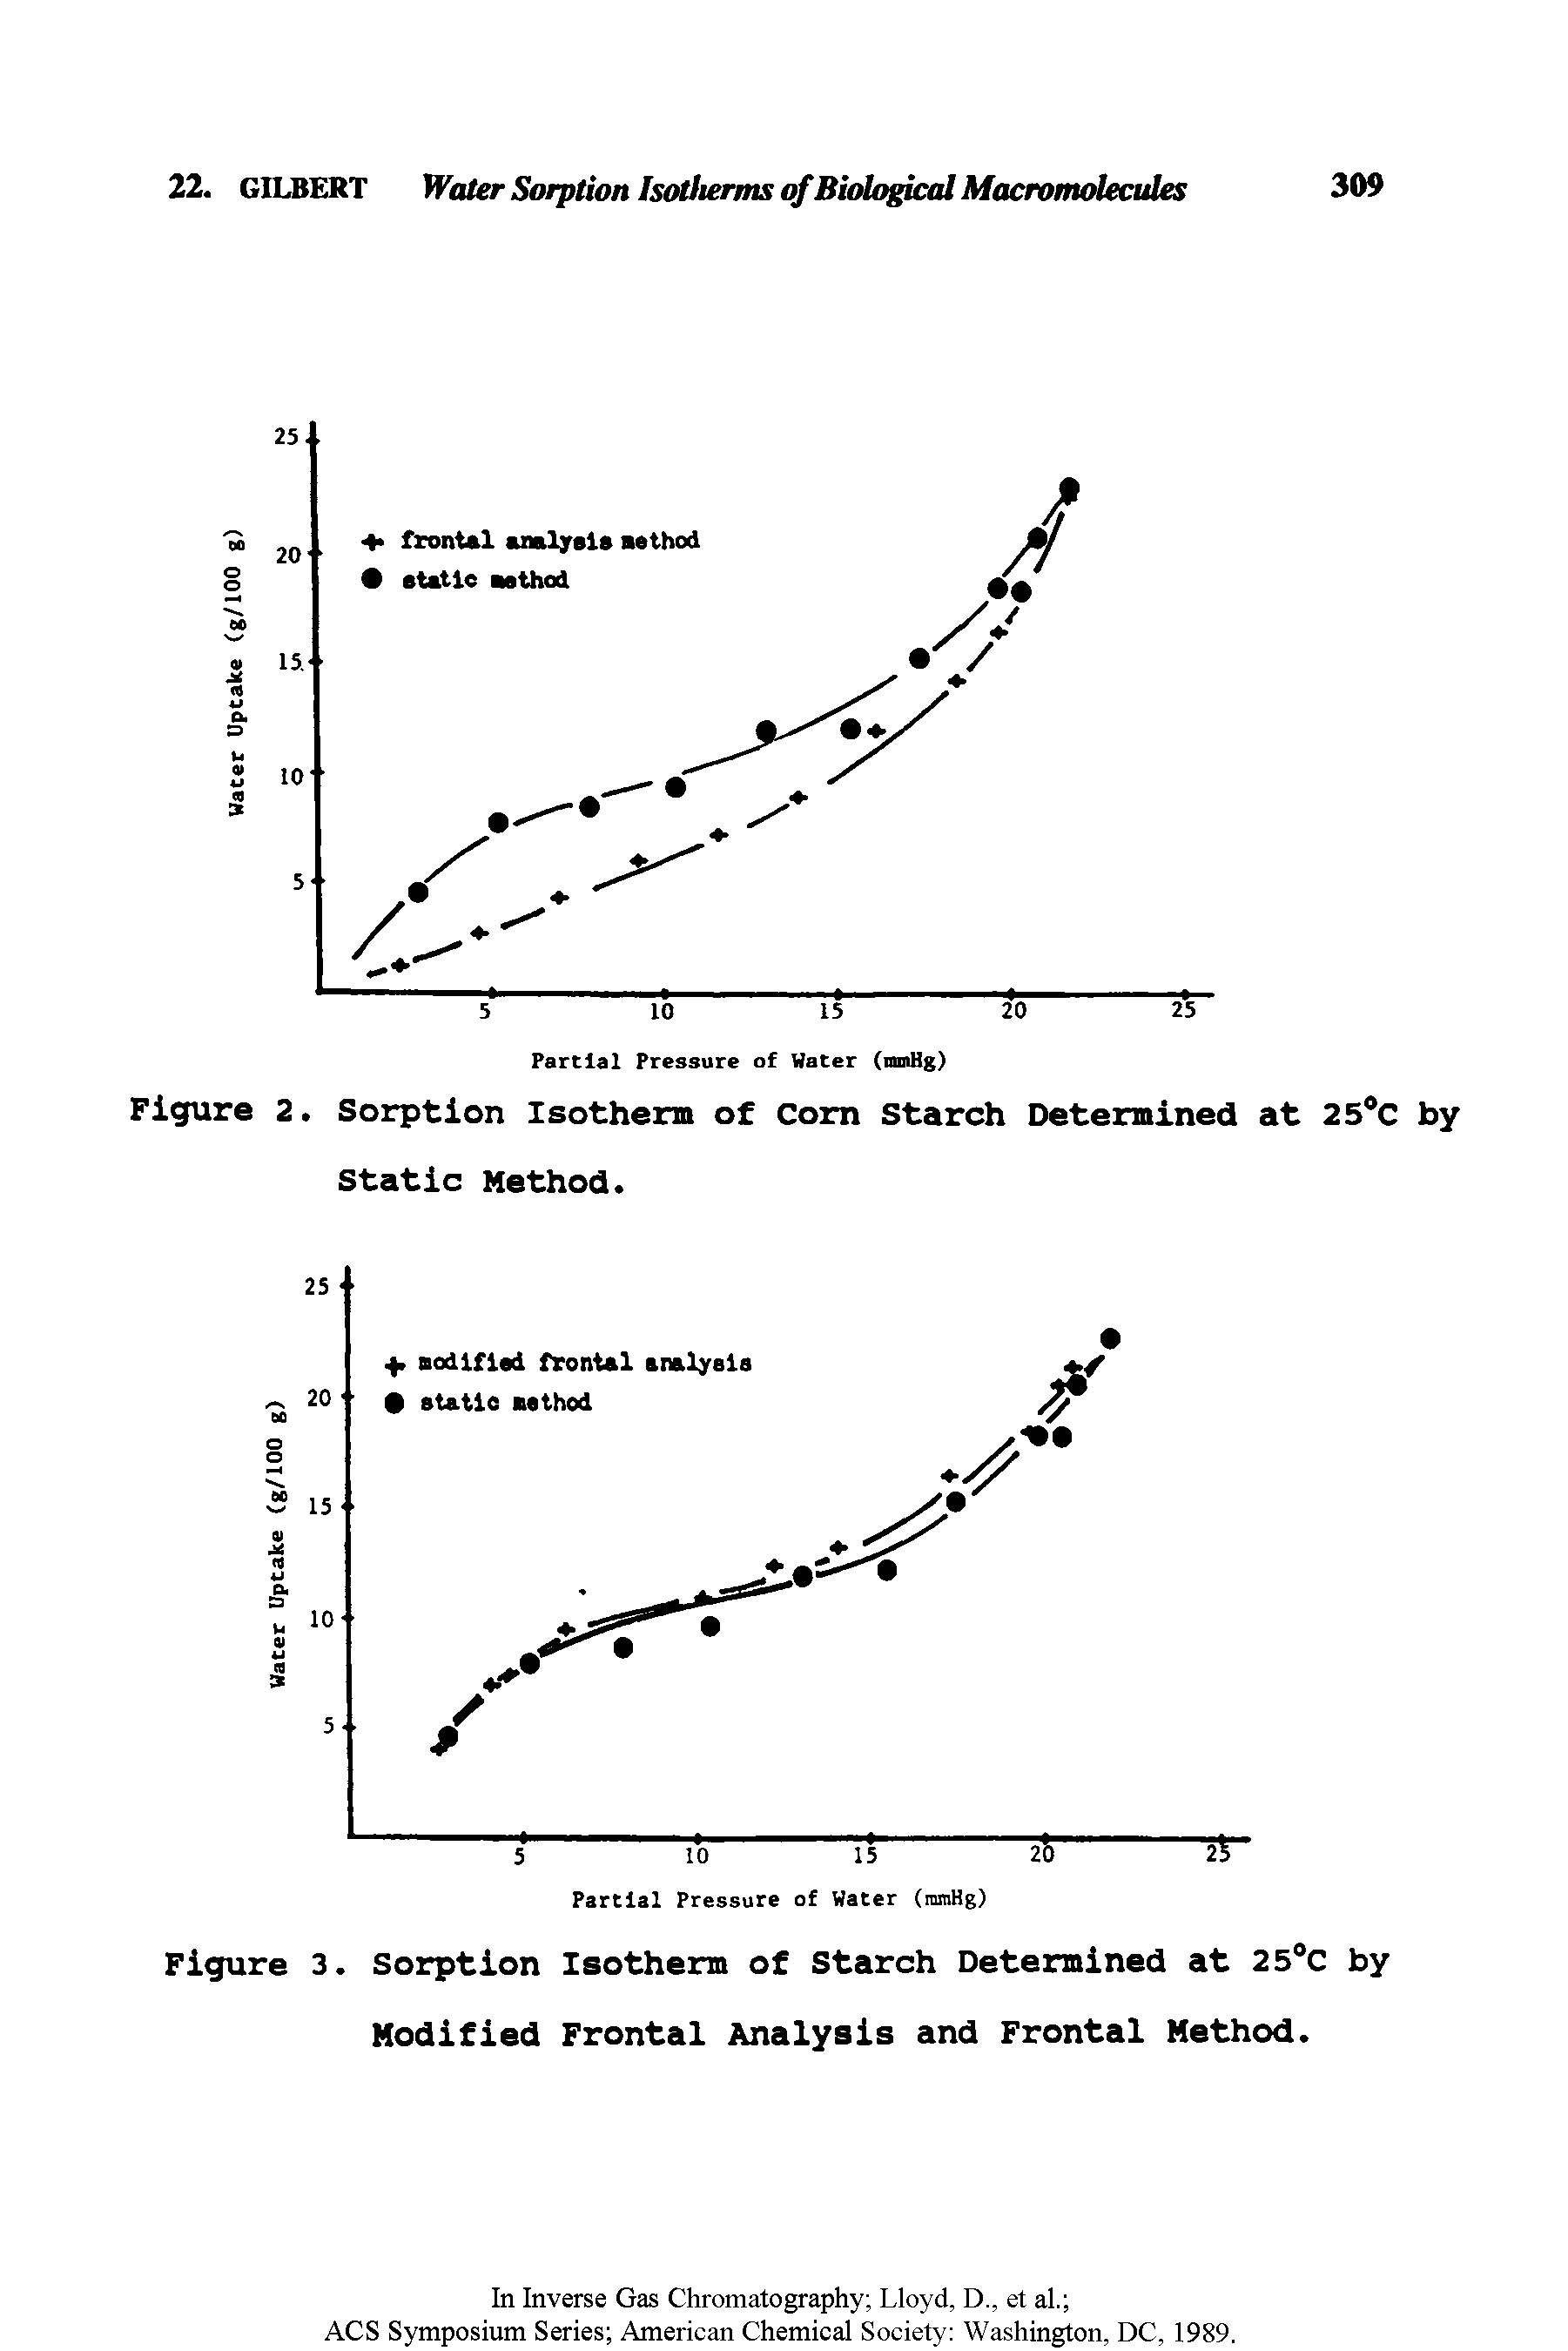 Figure 2. Sorption Isotherm of Com Starch Determined at 25°C by Static Method.